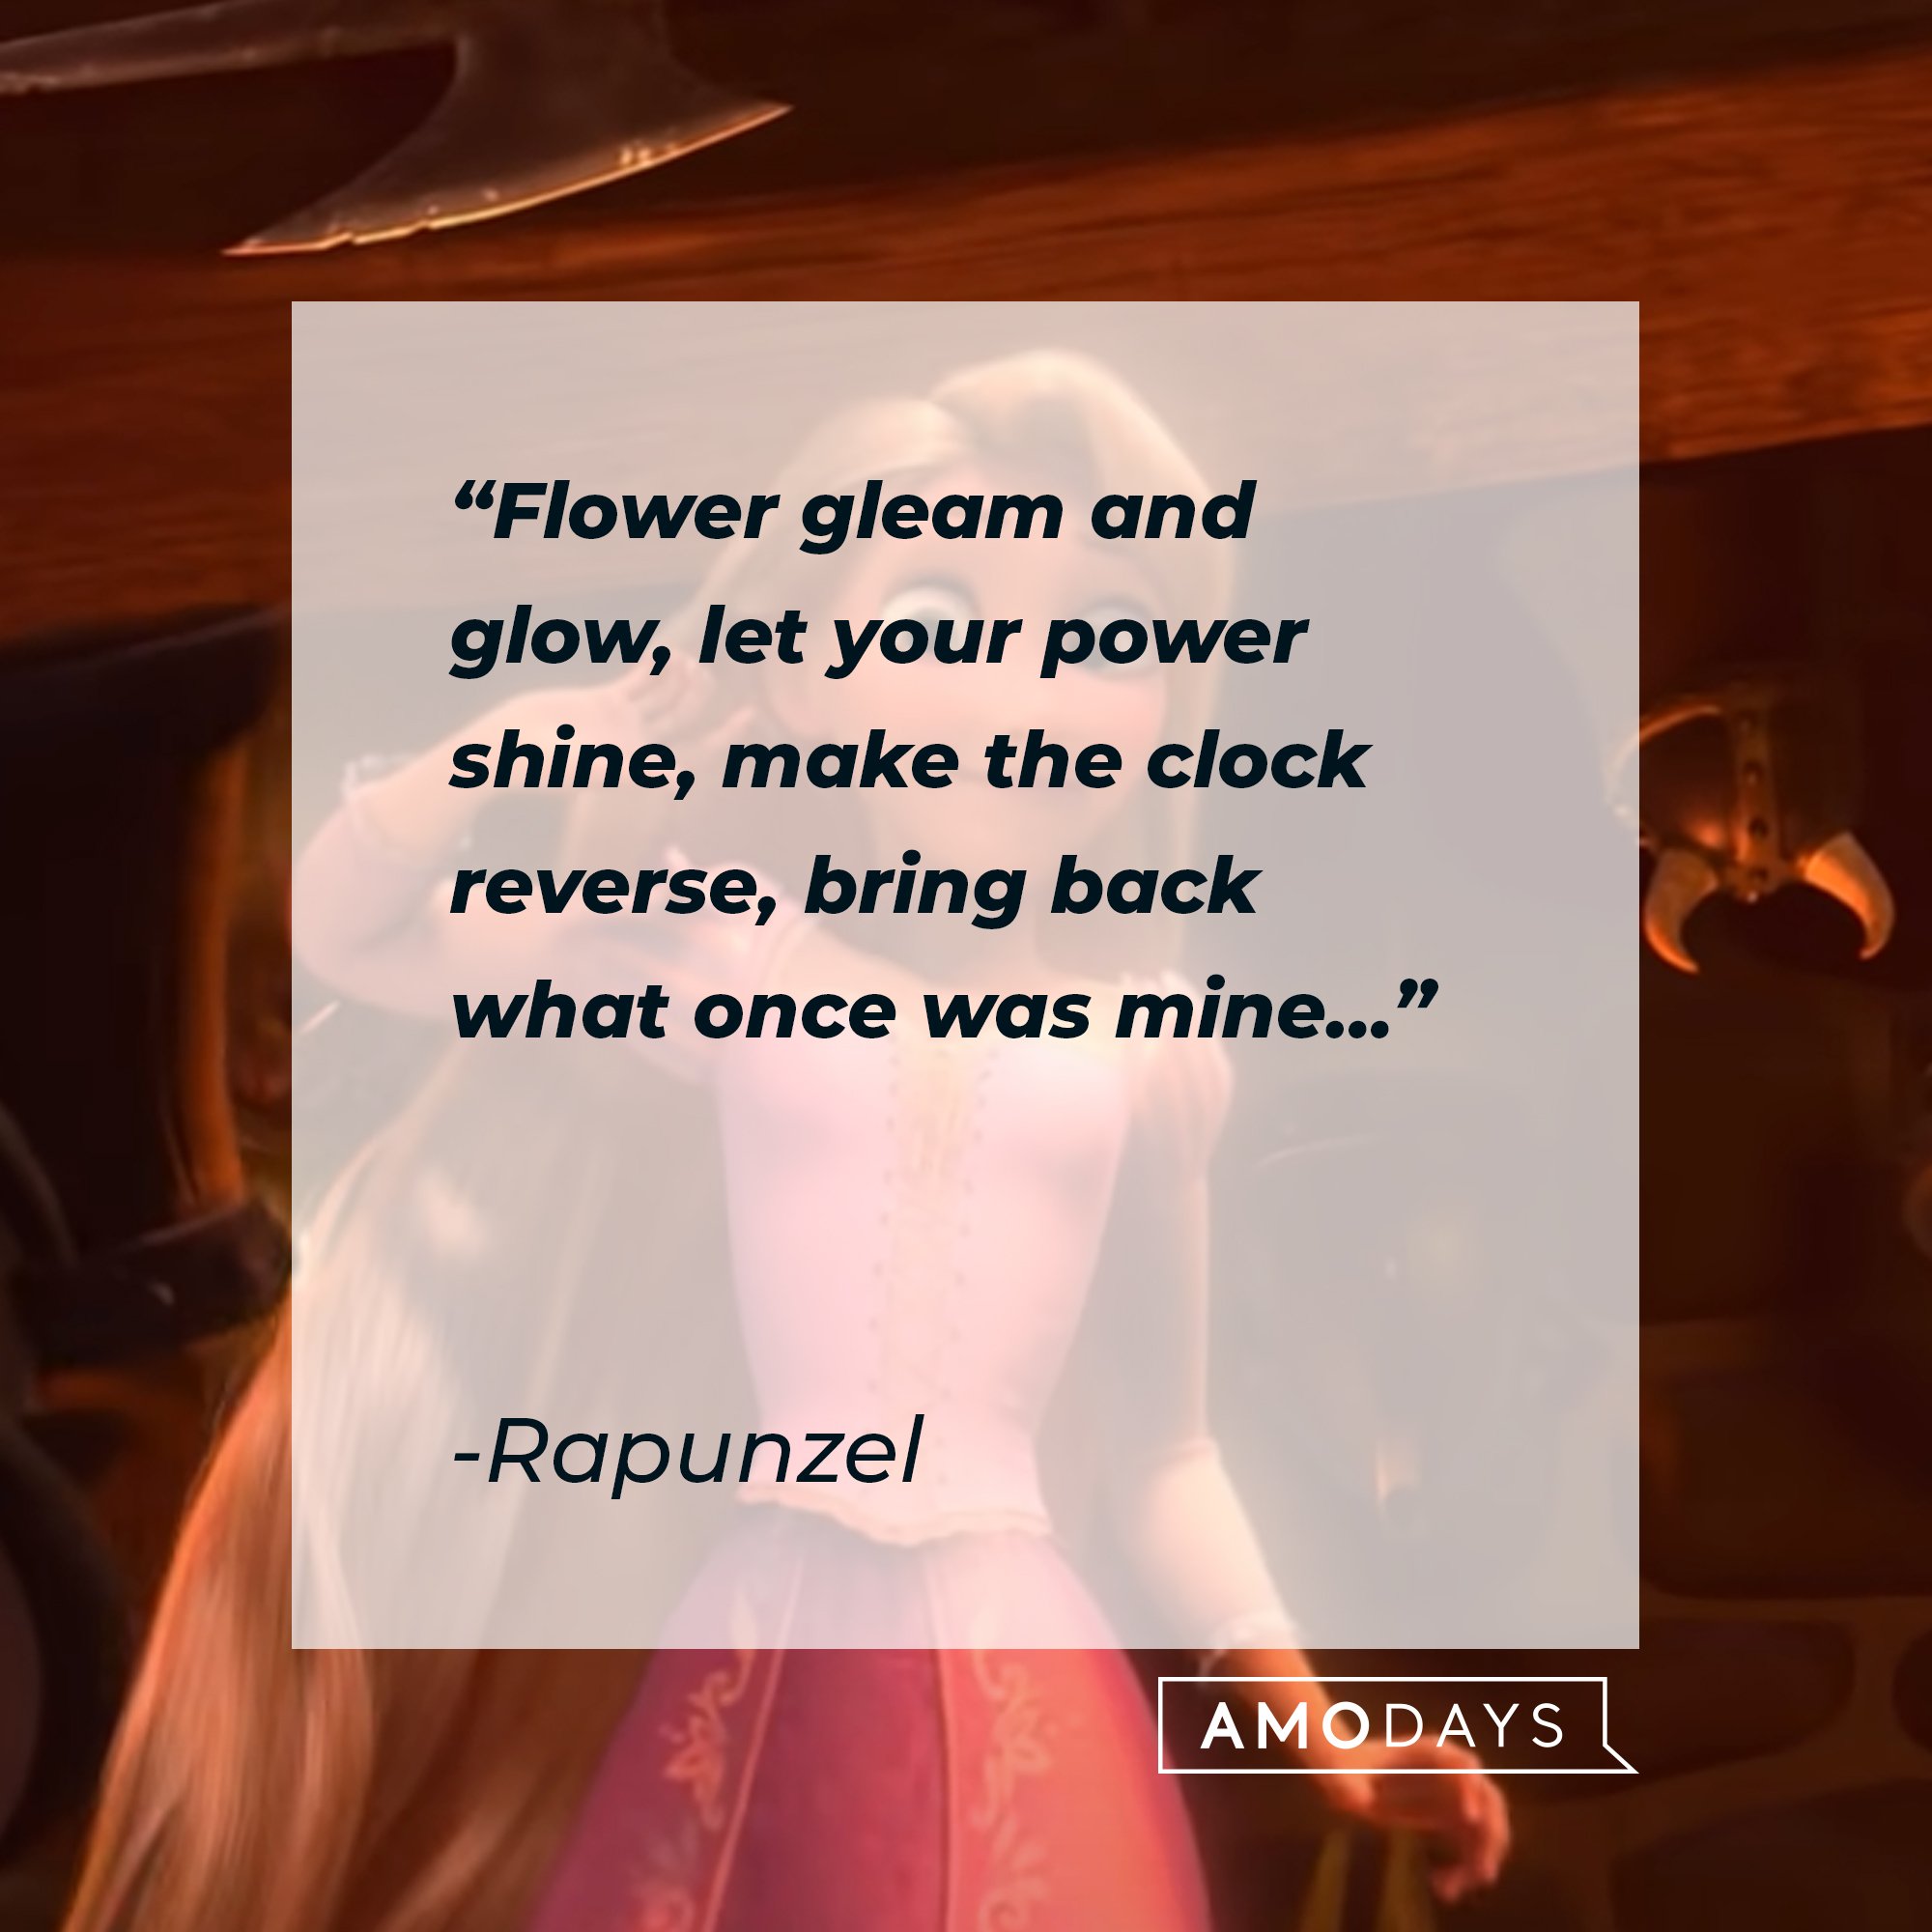 Rapunzel's quote: "Flower gleam and glow, let your power shine, make the clock reverse, bring back what once was mine…." | Image: AmoDays